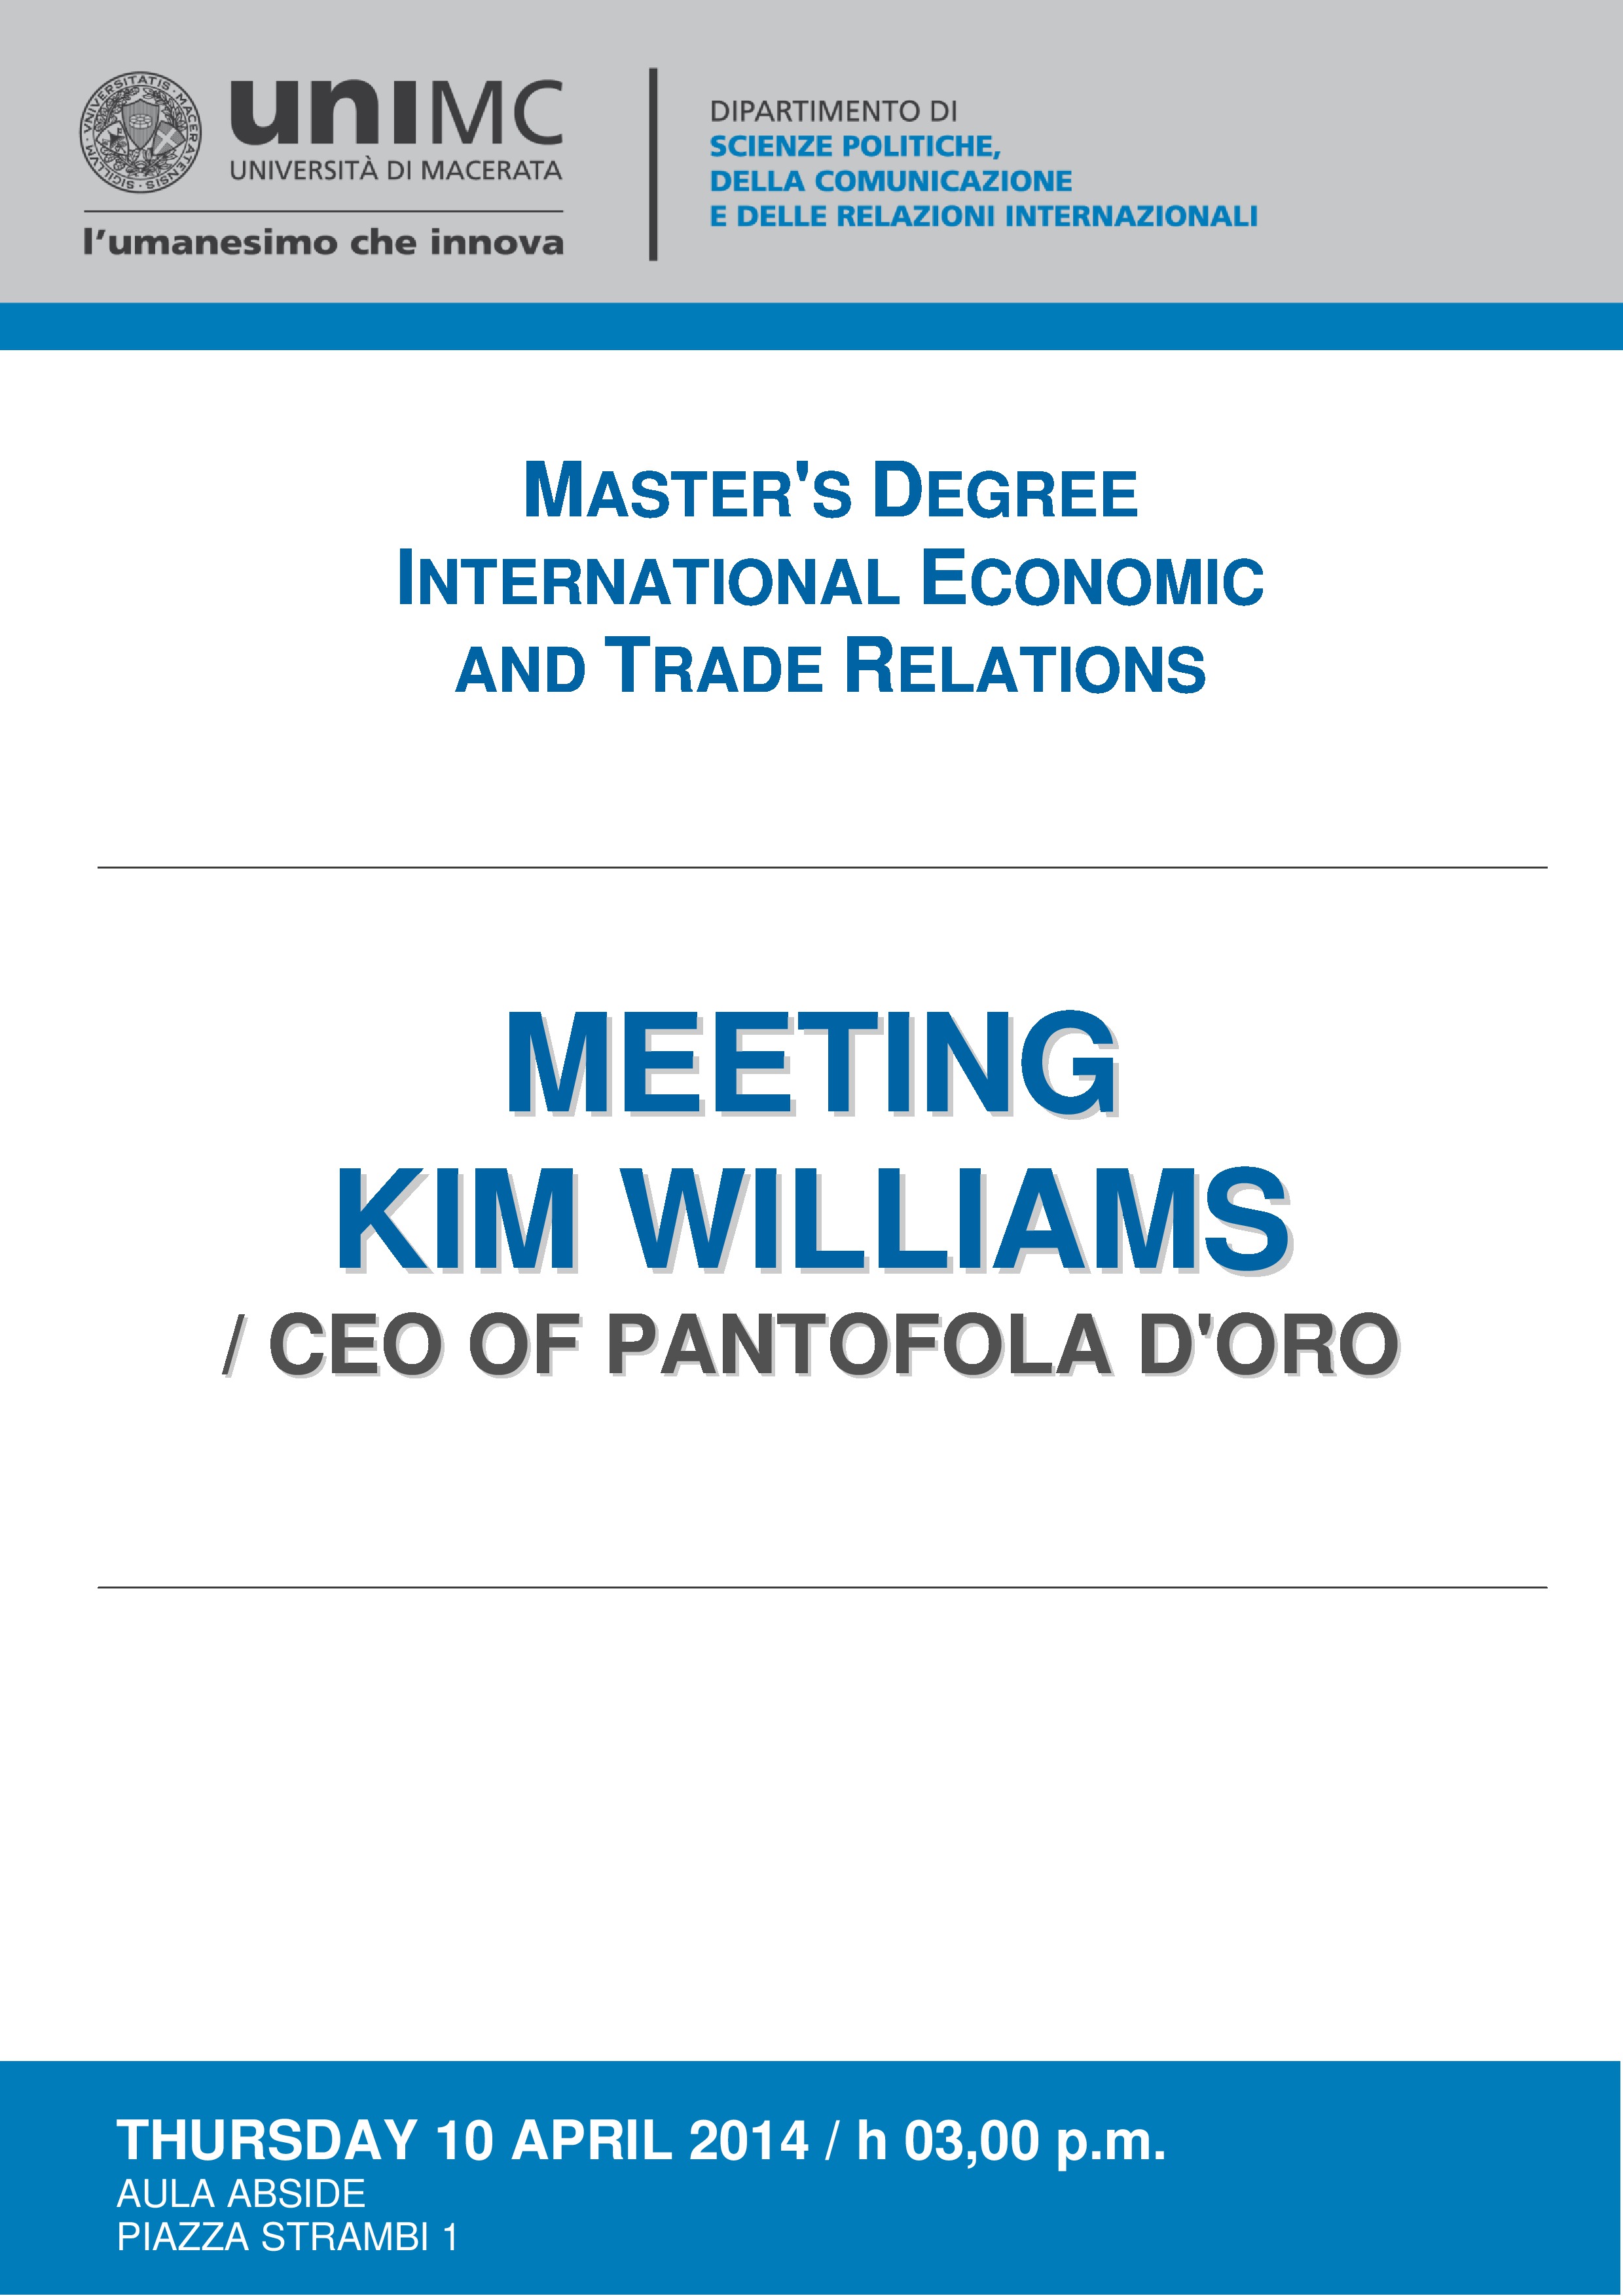 Meeting with Kim Williams, CEO of Pantofola d'Oro